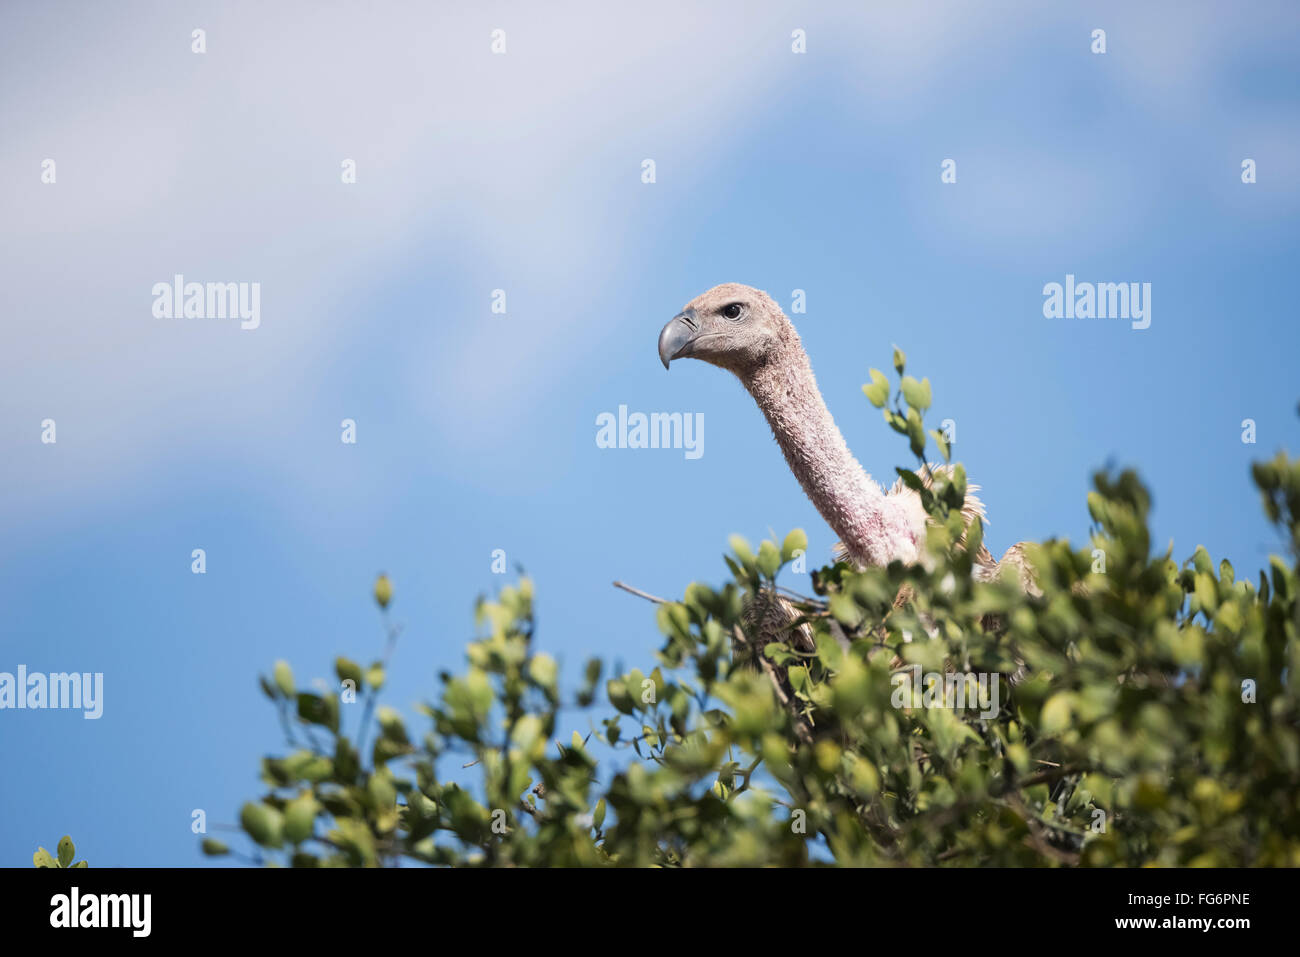 An African white-backed vulture (Gyps africanus) peeks out over the branches of a tree against a blue sky with a few light clouds; Narok, Kenya Stock Photo